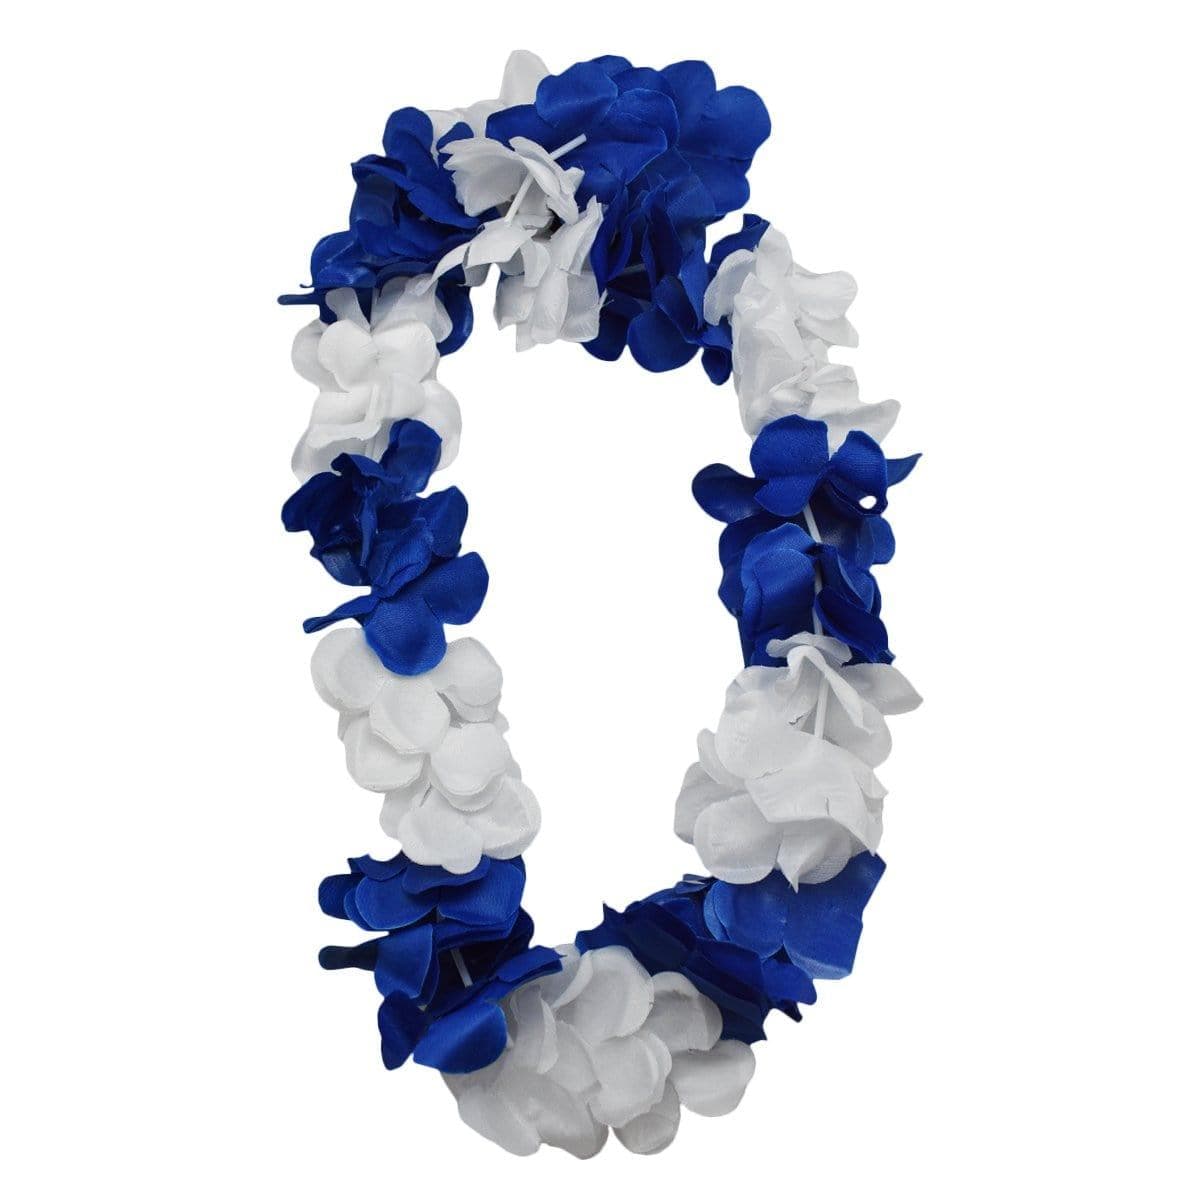 Buy St-Jean-Baptiste Quebec Lei sold at Party Expert